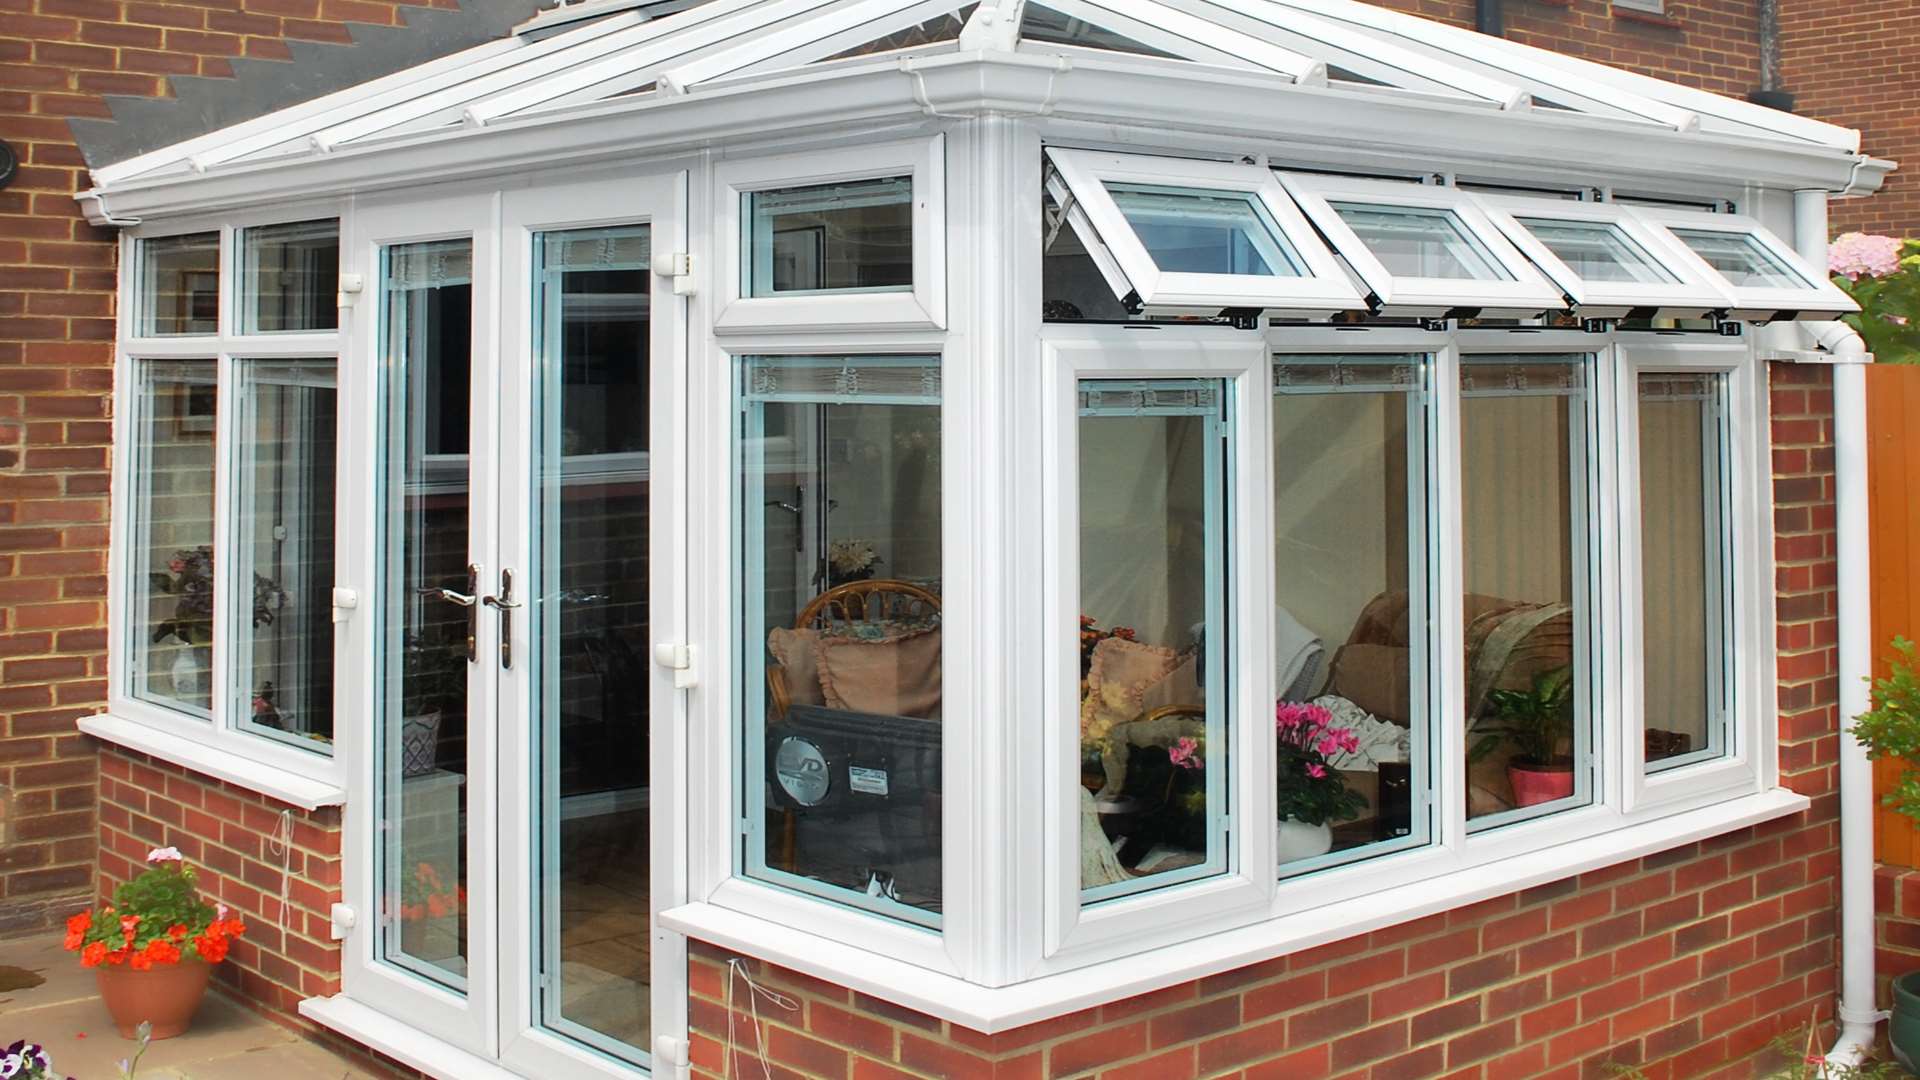 Get your conservatory ready for summer